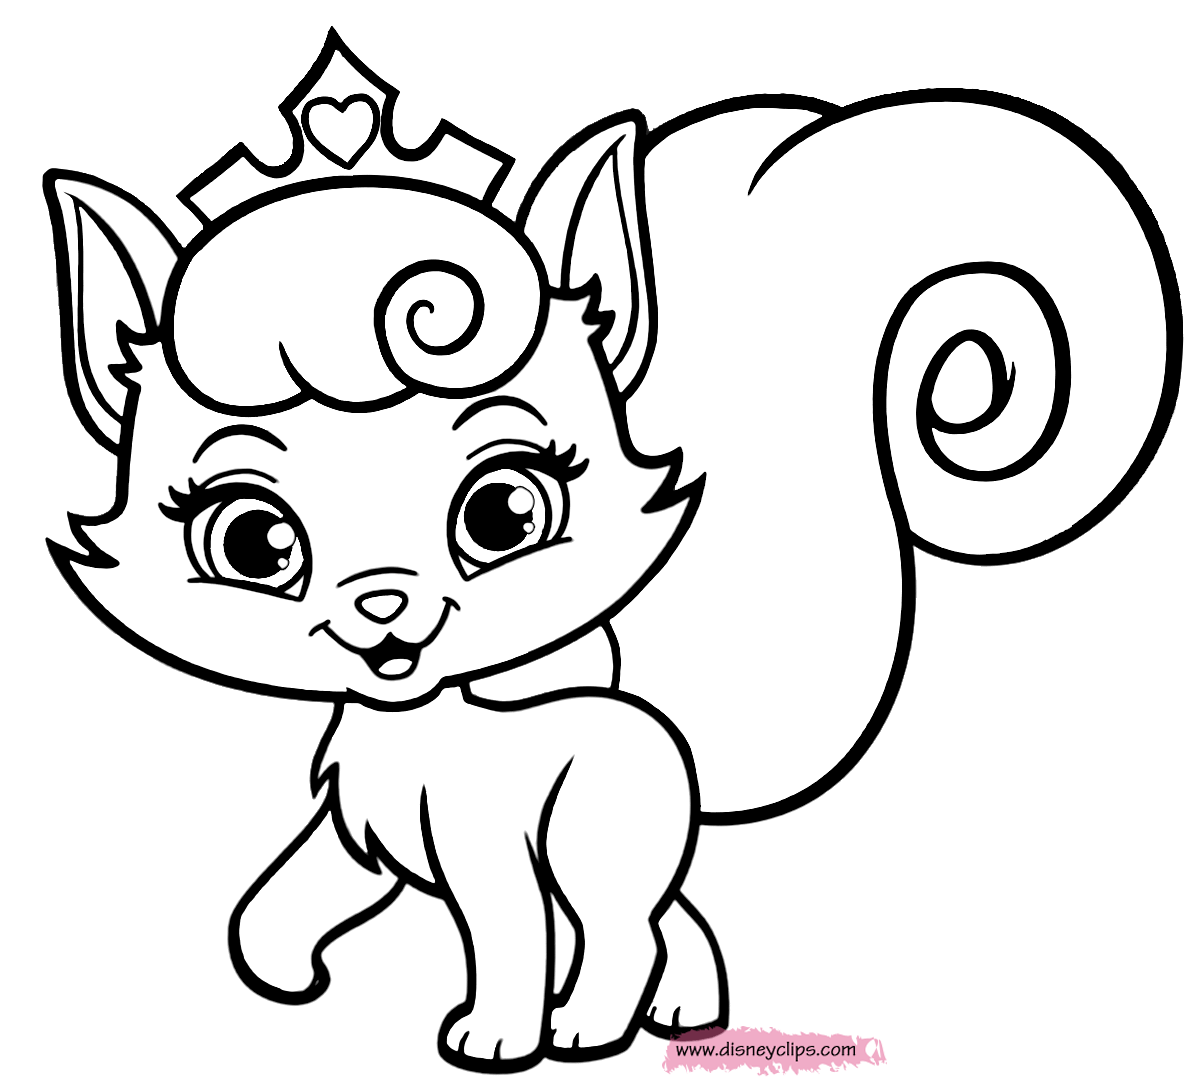 princess puppy coloring pages princess and her poodle dog coloring page free printable princess coloring puppy pages 